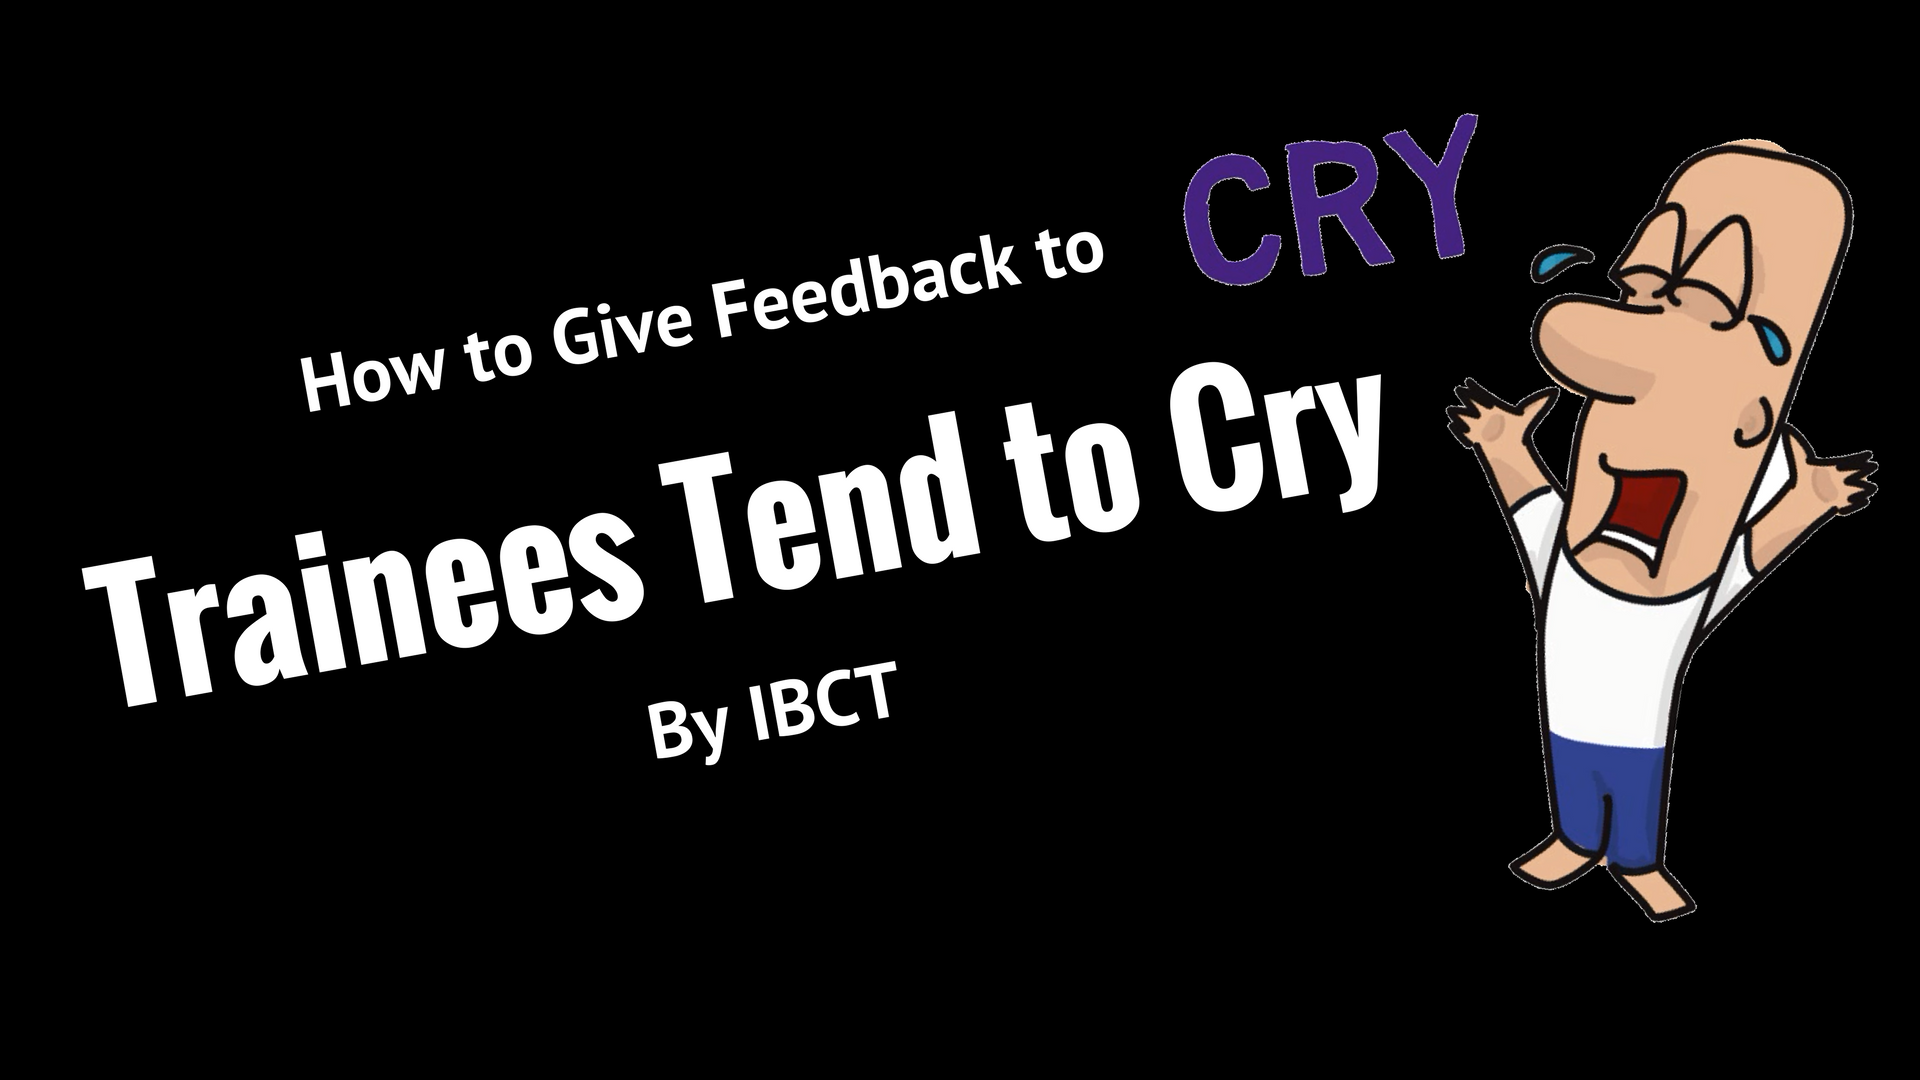 Feedback to trainees tend to cry